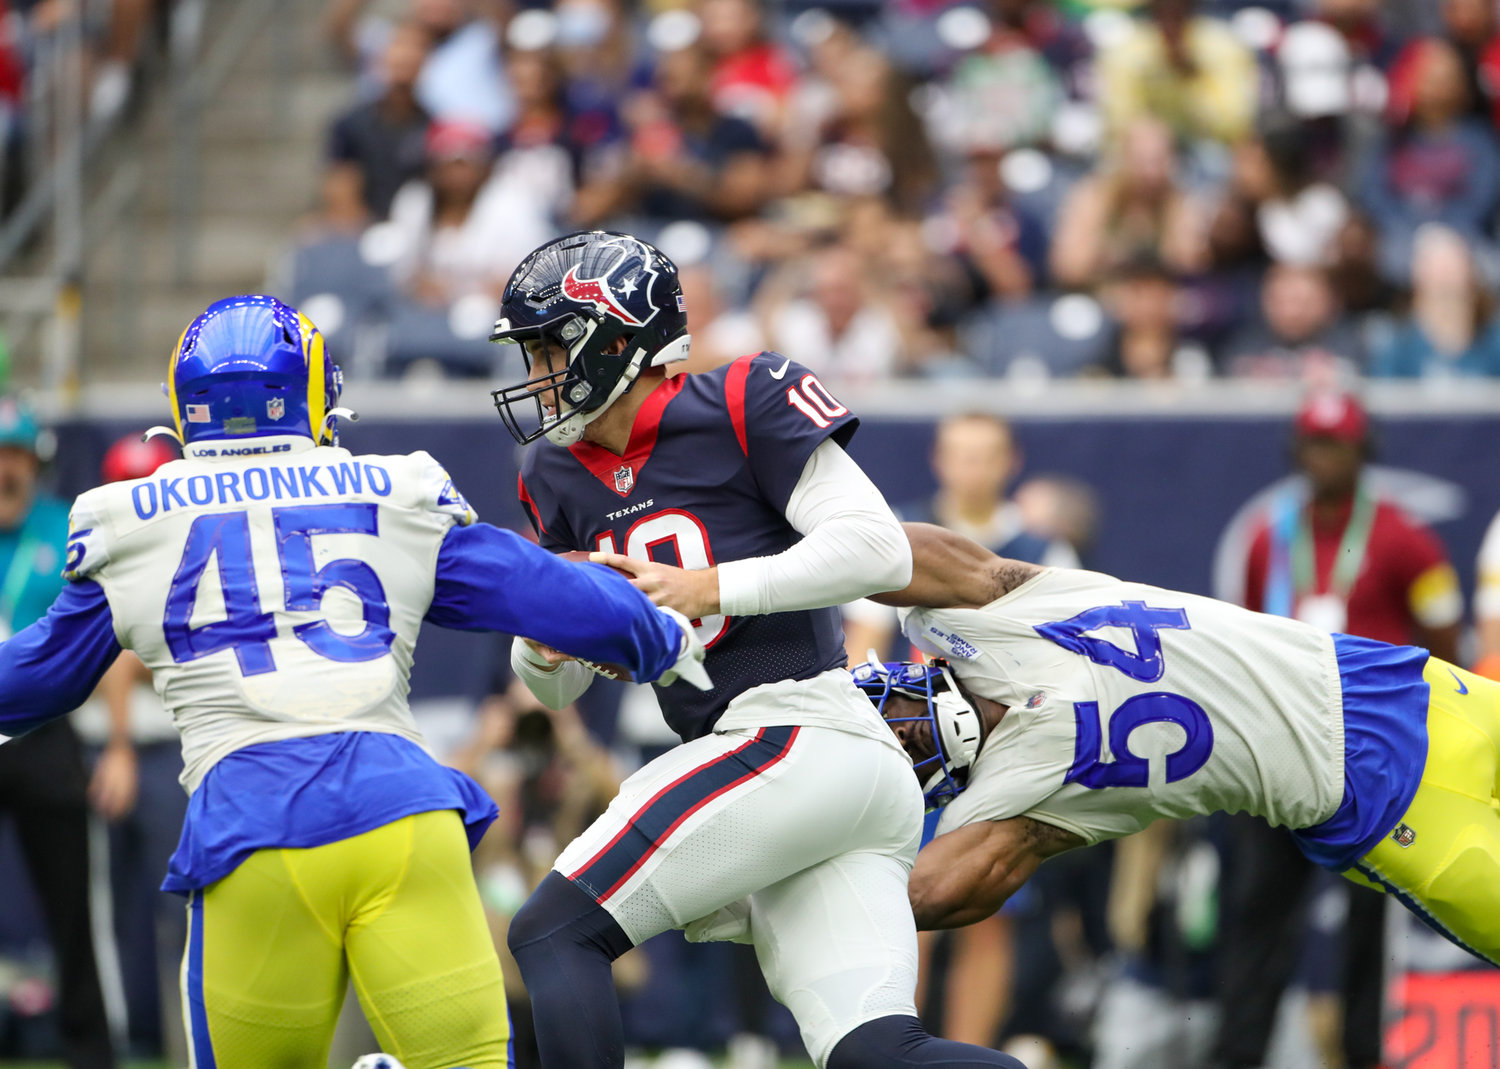 Los Angeles Rams linebacker Ogbonnia Okoronkwo (45) and linebacker Leonard Floyd (54) team up on a sack of Houston Texans quarterback Davis Mills (10) during an NFL game between Houston and the Los Angeles Rams on October 31, 2021 in Houston, Texas.